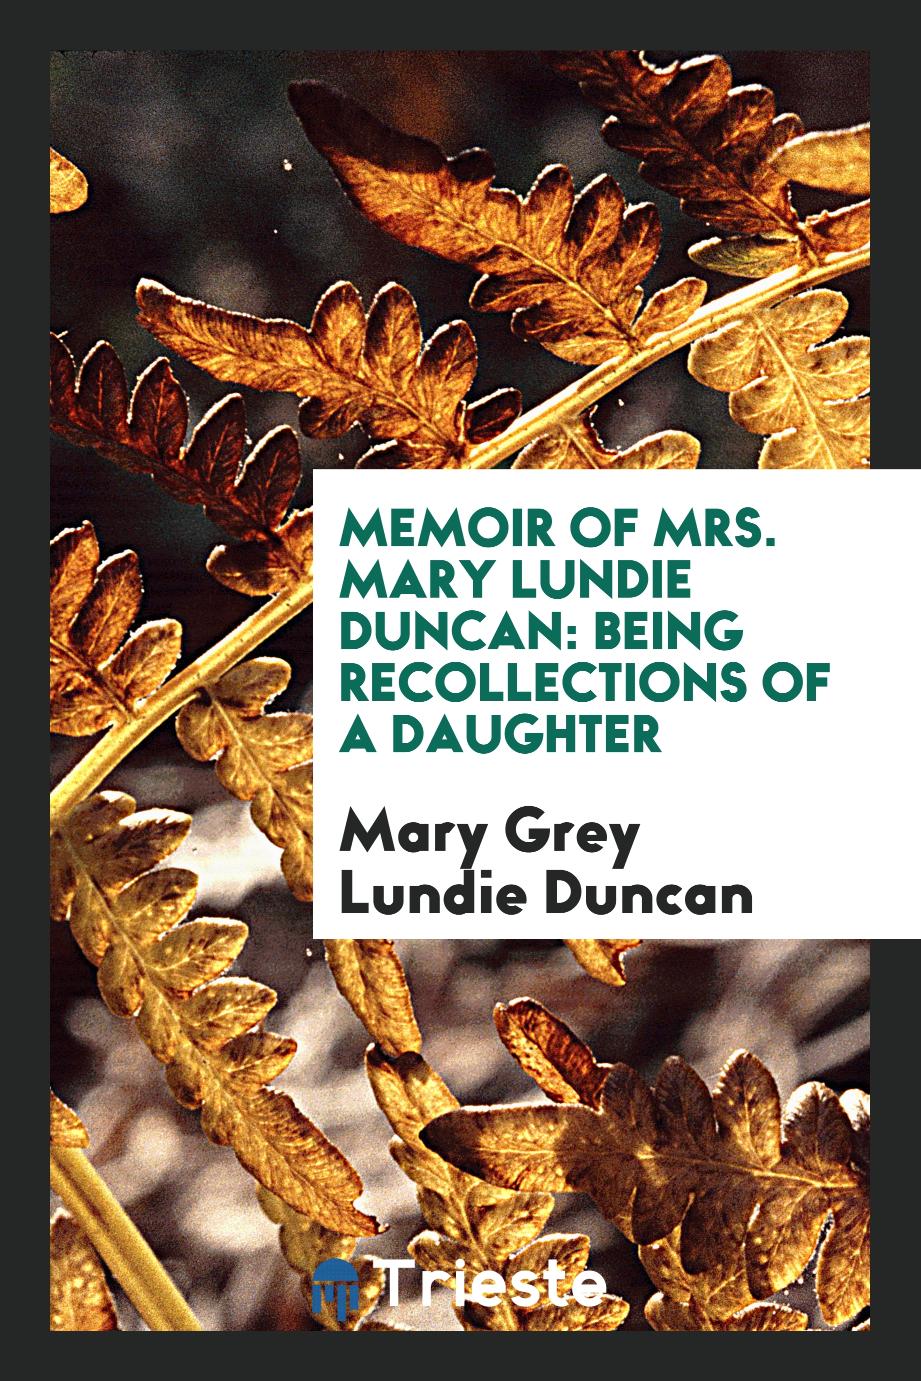 Memoir of Mrs. Mary Lundie Duncan: Being Recollections of a Daughter